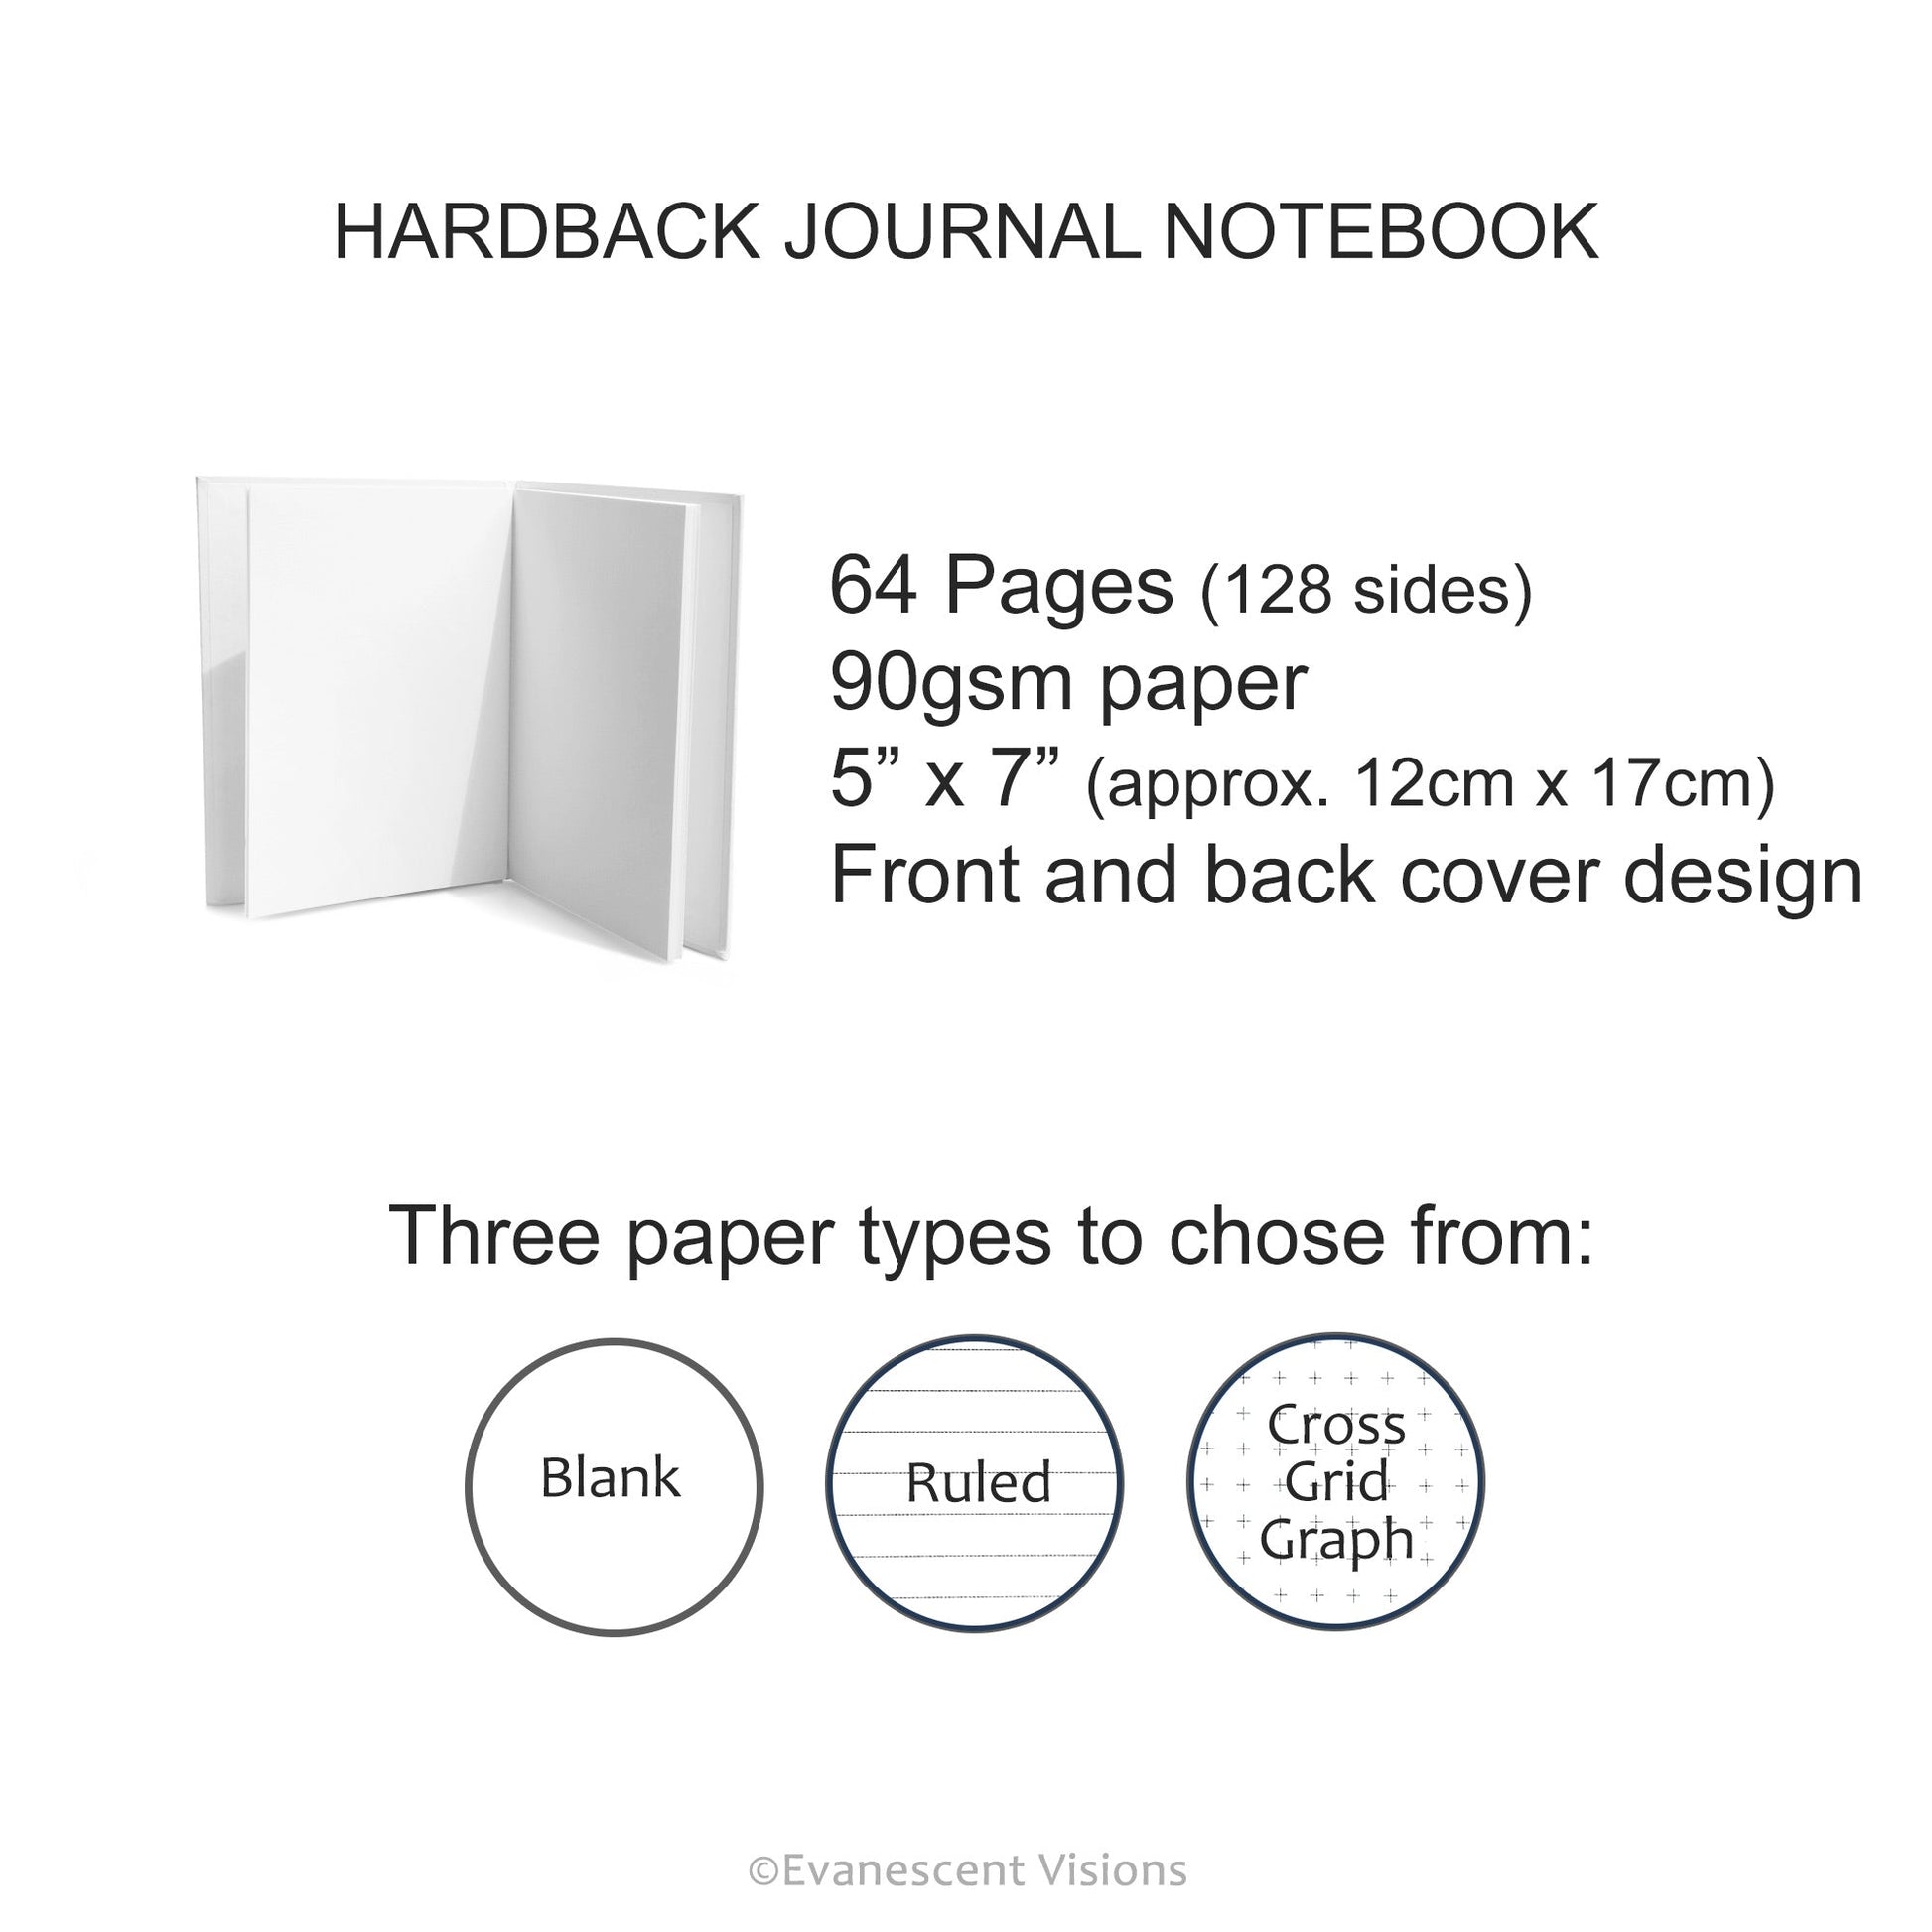  Fine Art Hardcover Notebook product details and options